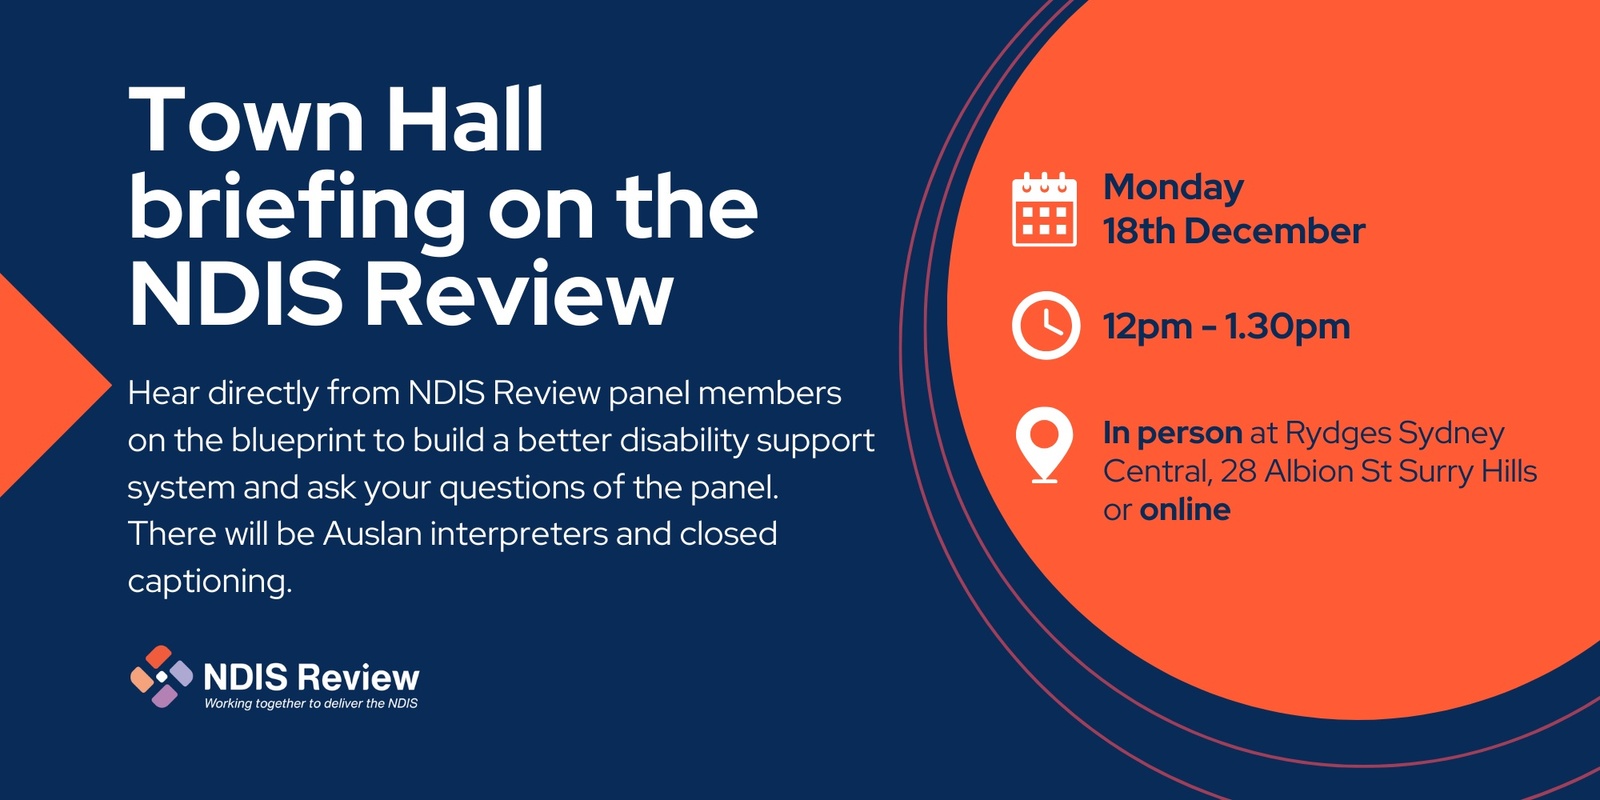 Banner image for Hybrid Town Hall briefing on the NDIS Review